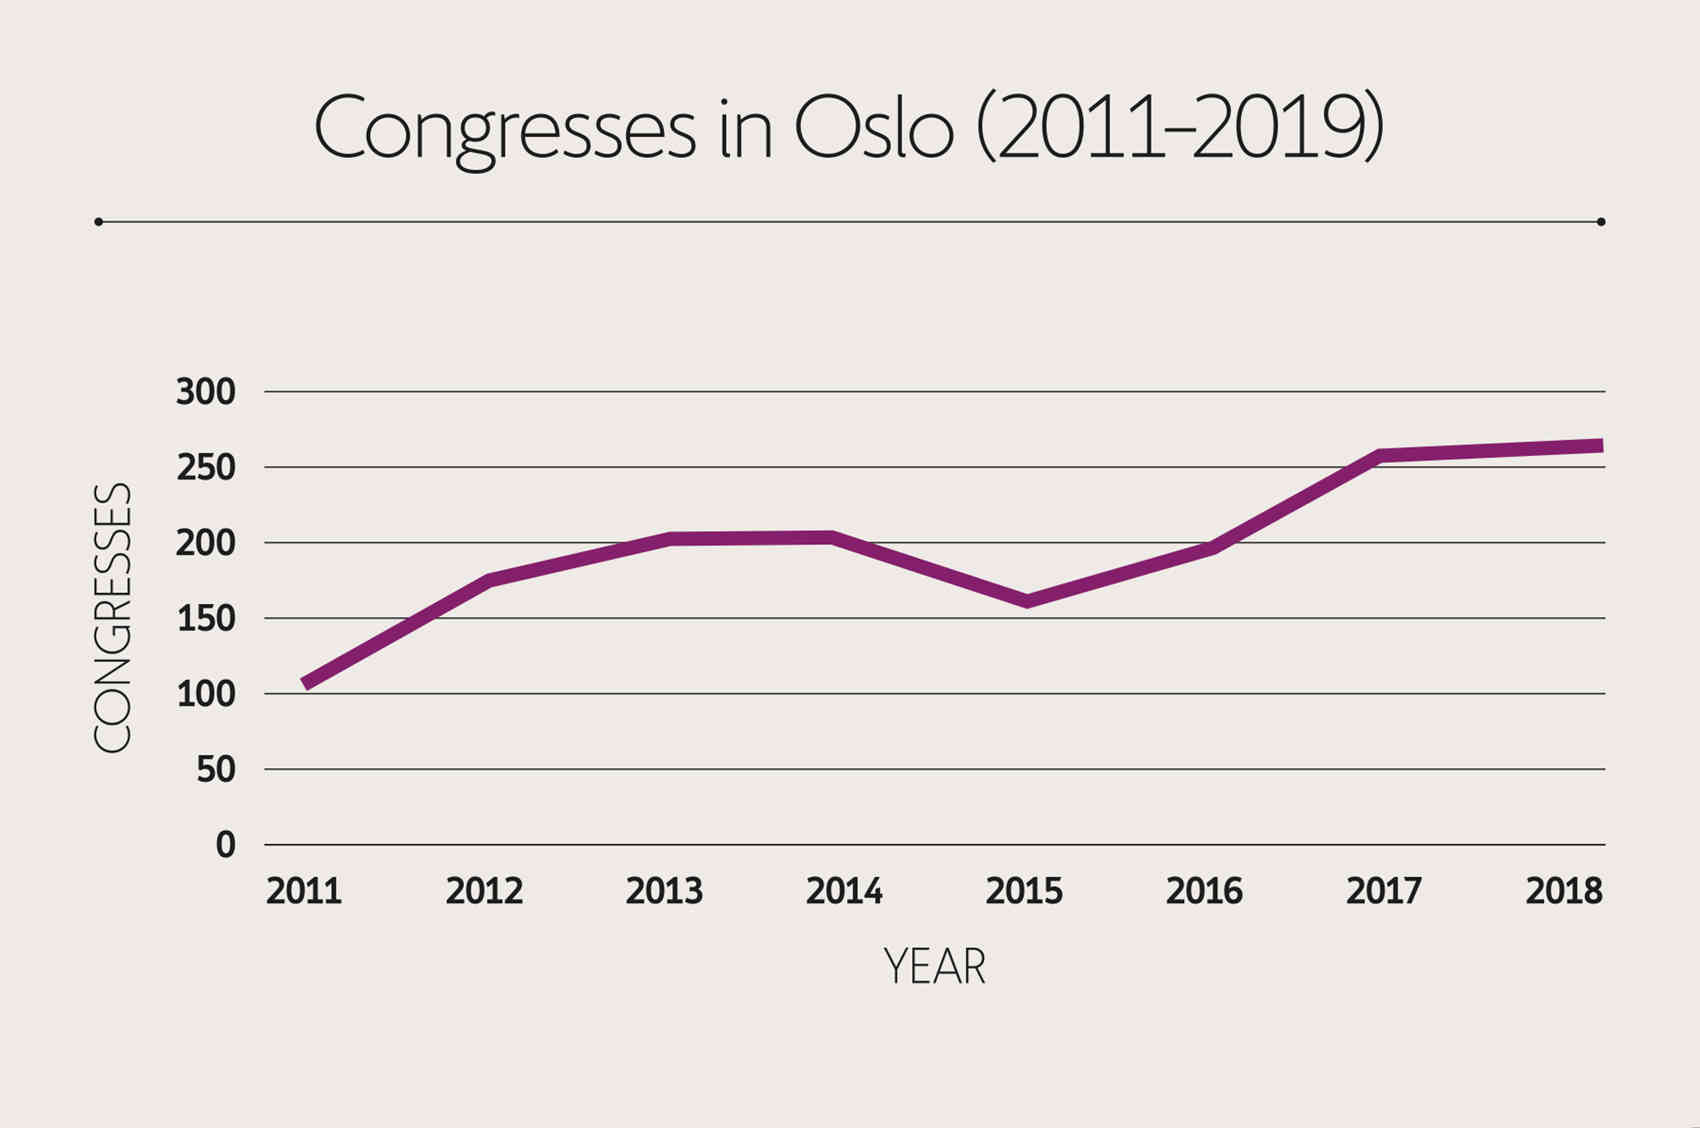 Oslo has seen a rise in congresses from just over a hundred in 2011 to nearly 250 in 2019.